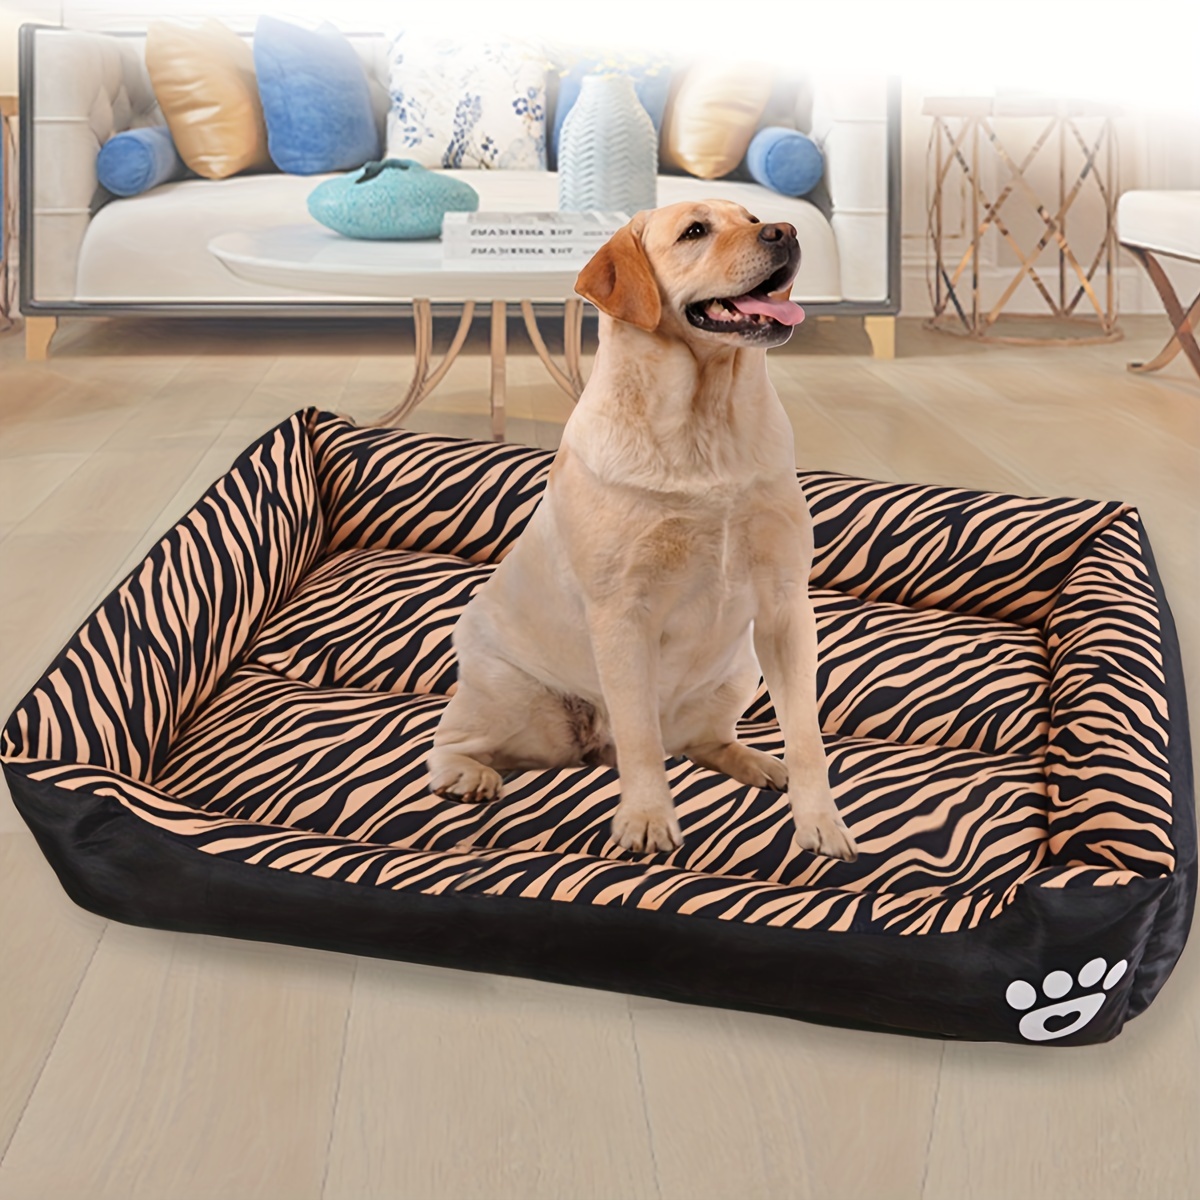 

Plush Comfort Dog Bed Mat With Non-slip Bottom, Multiple Sizes - Polyester Fiber Fill, Rectangle Shape For Extra Small To Large Breeds, Machine Washable Pet Bed With Soft Edging